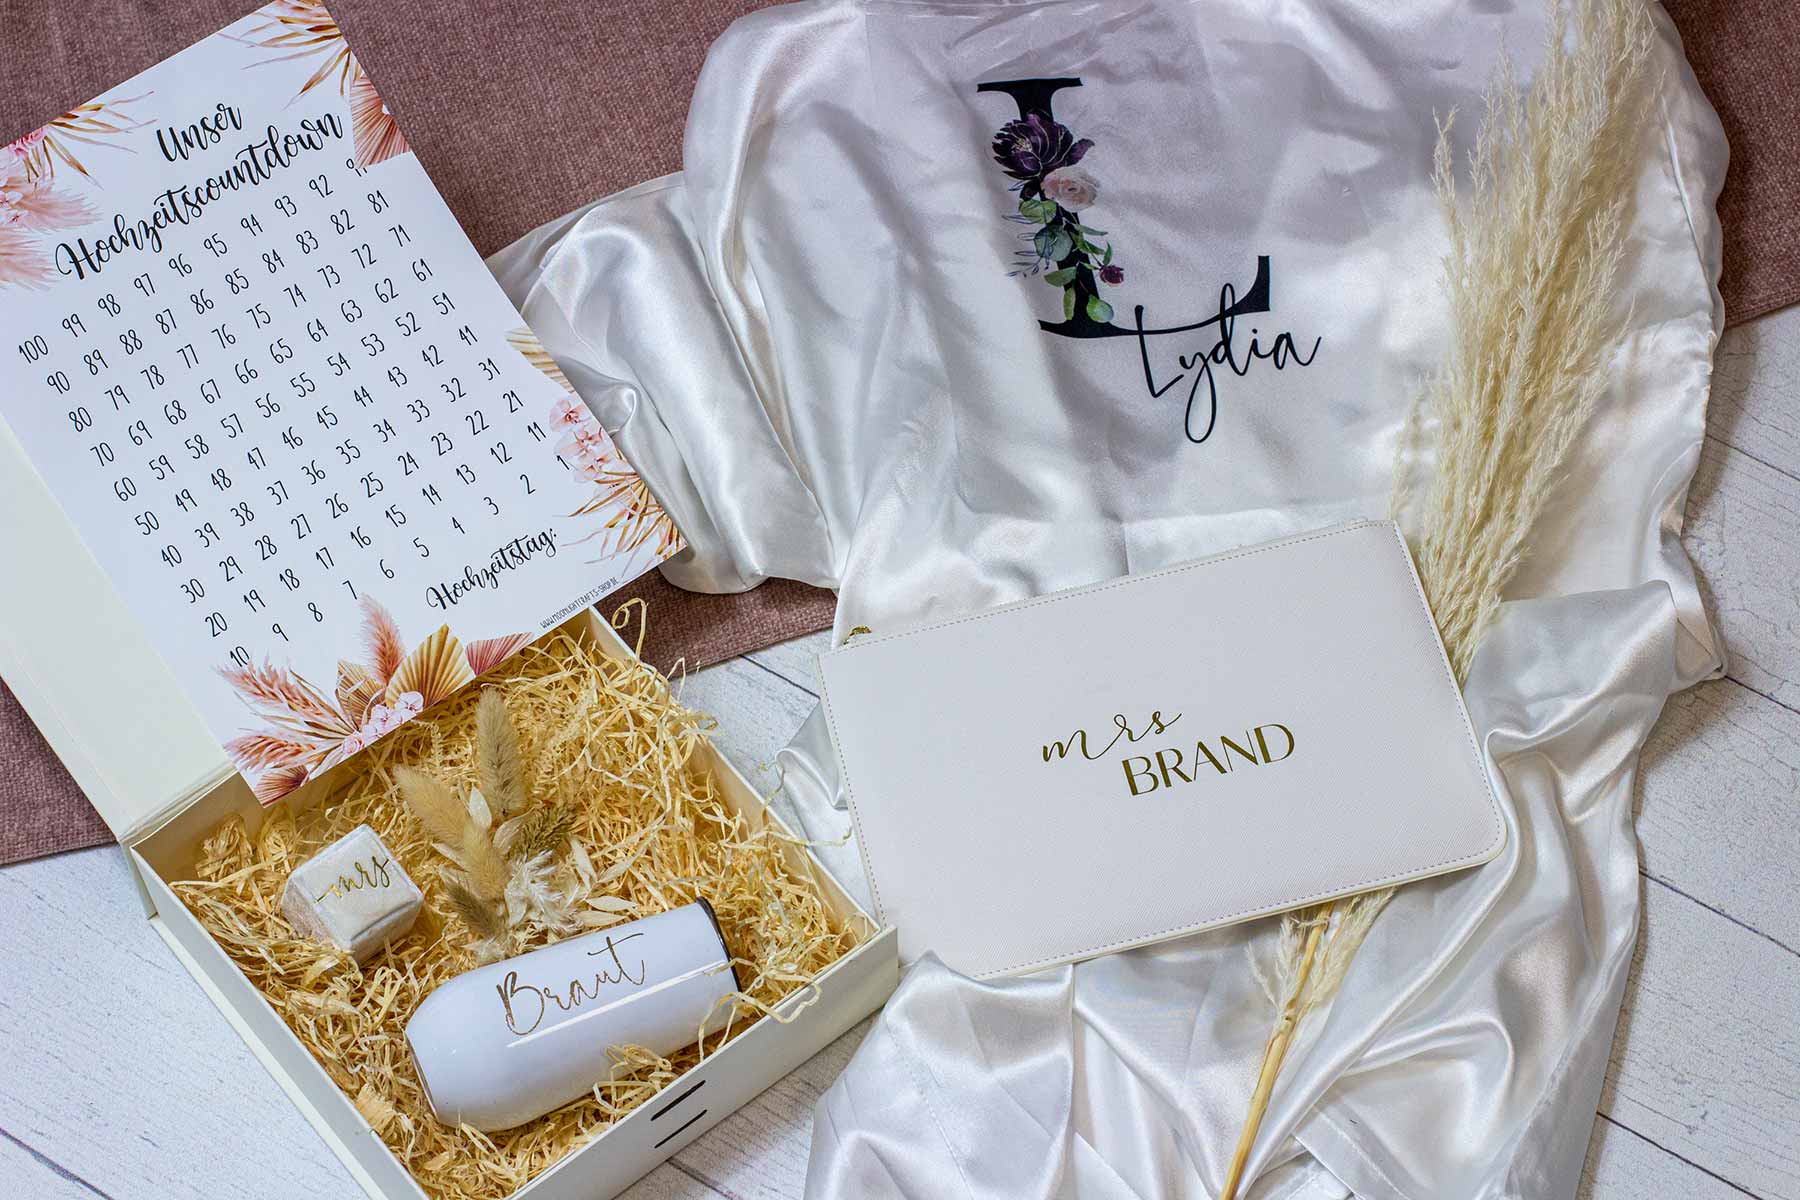 Put together a gift box for the bride, maid of honor & Co.